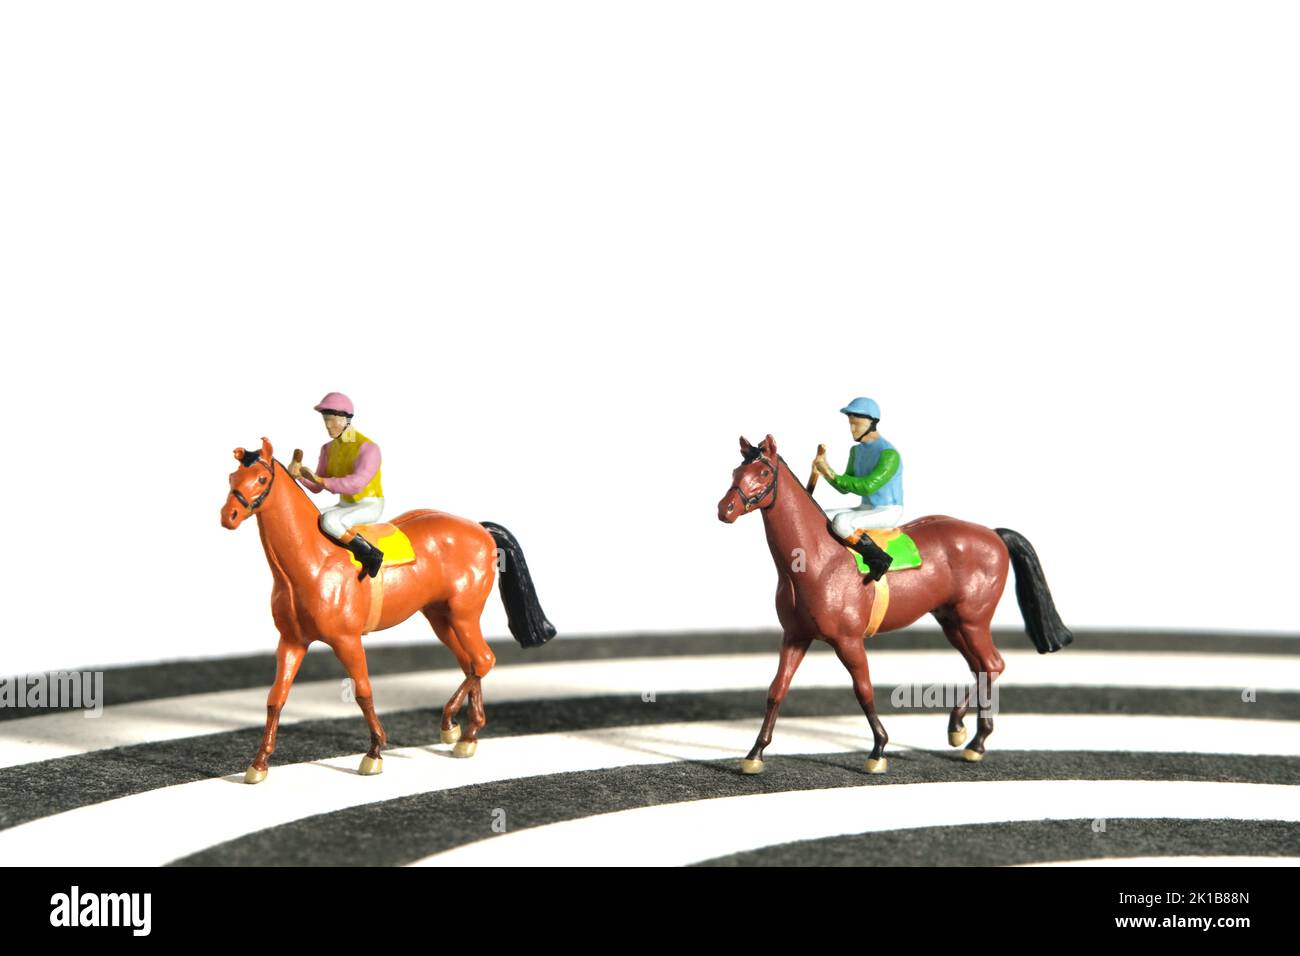 Miniature people toy figure photography. Jockey men riding horse on a racetrack from dartboard. Isolated on white background. Image photo Stock Photo